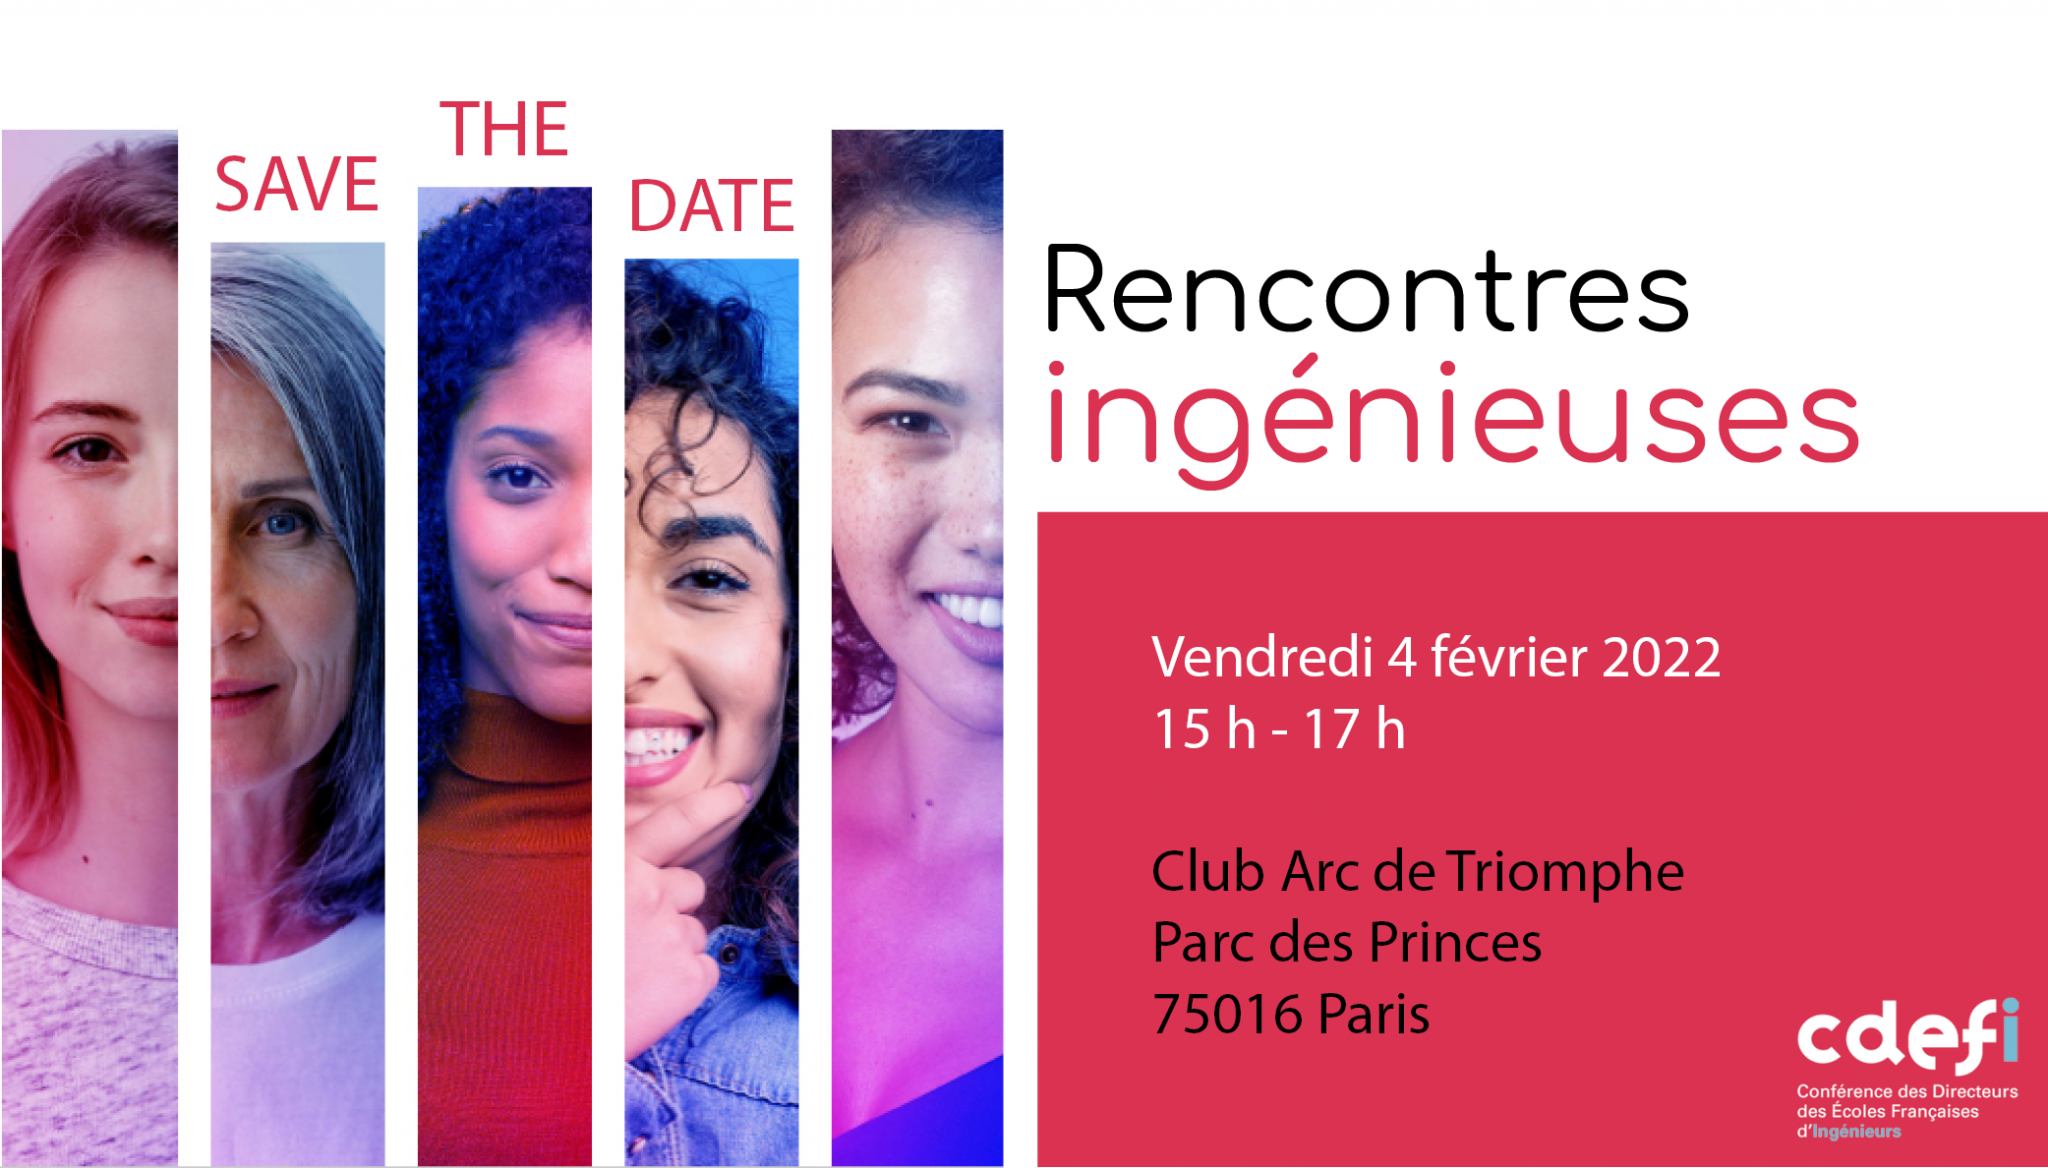 Rencontres IngÃ©nieuses - Save the date